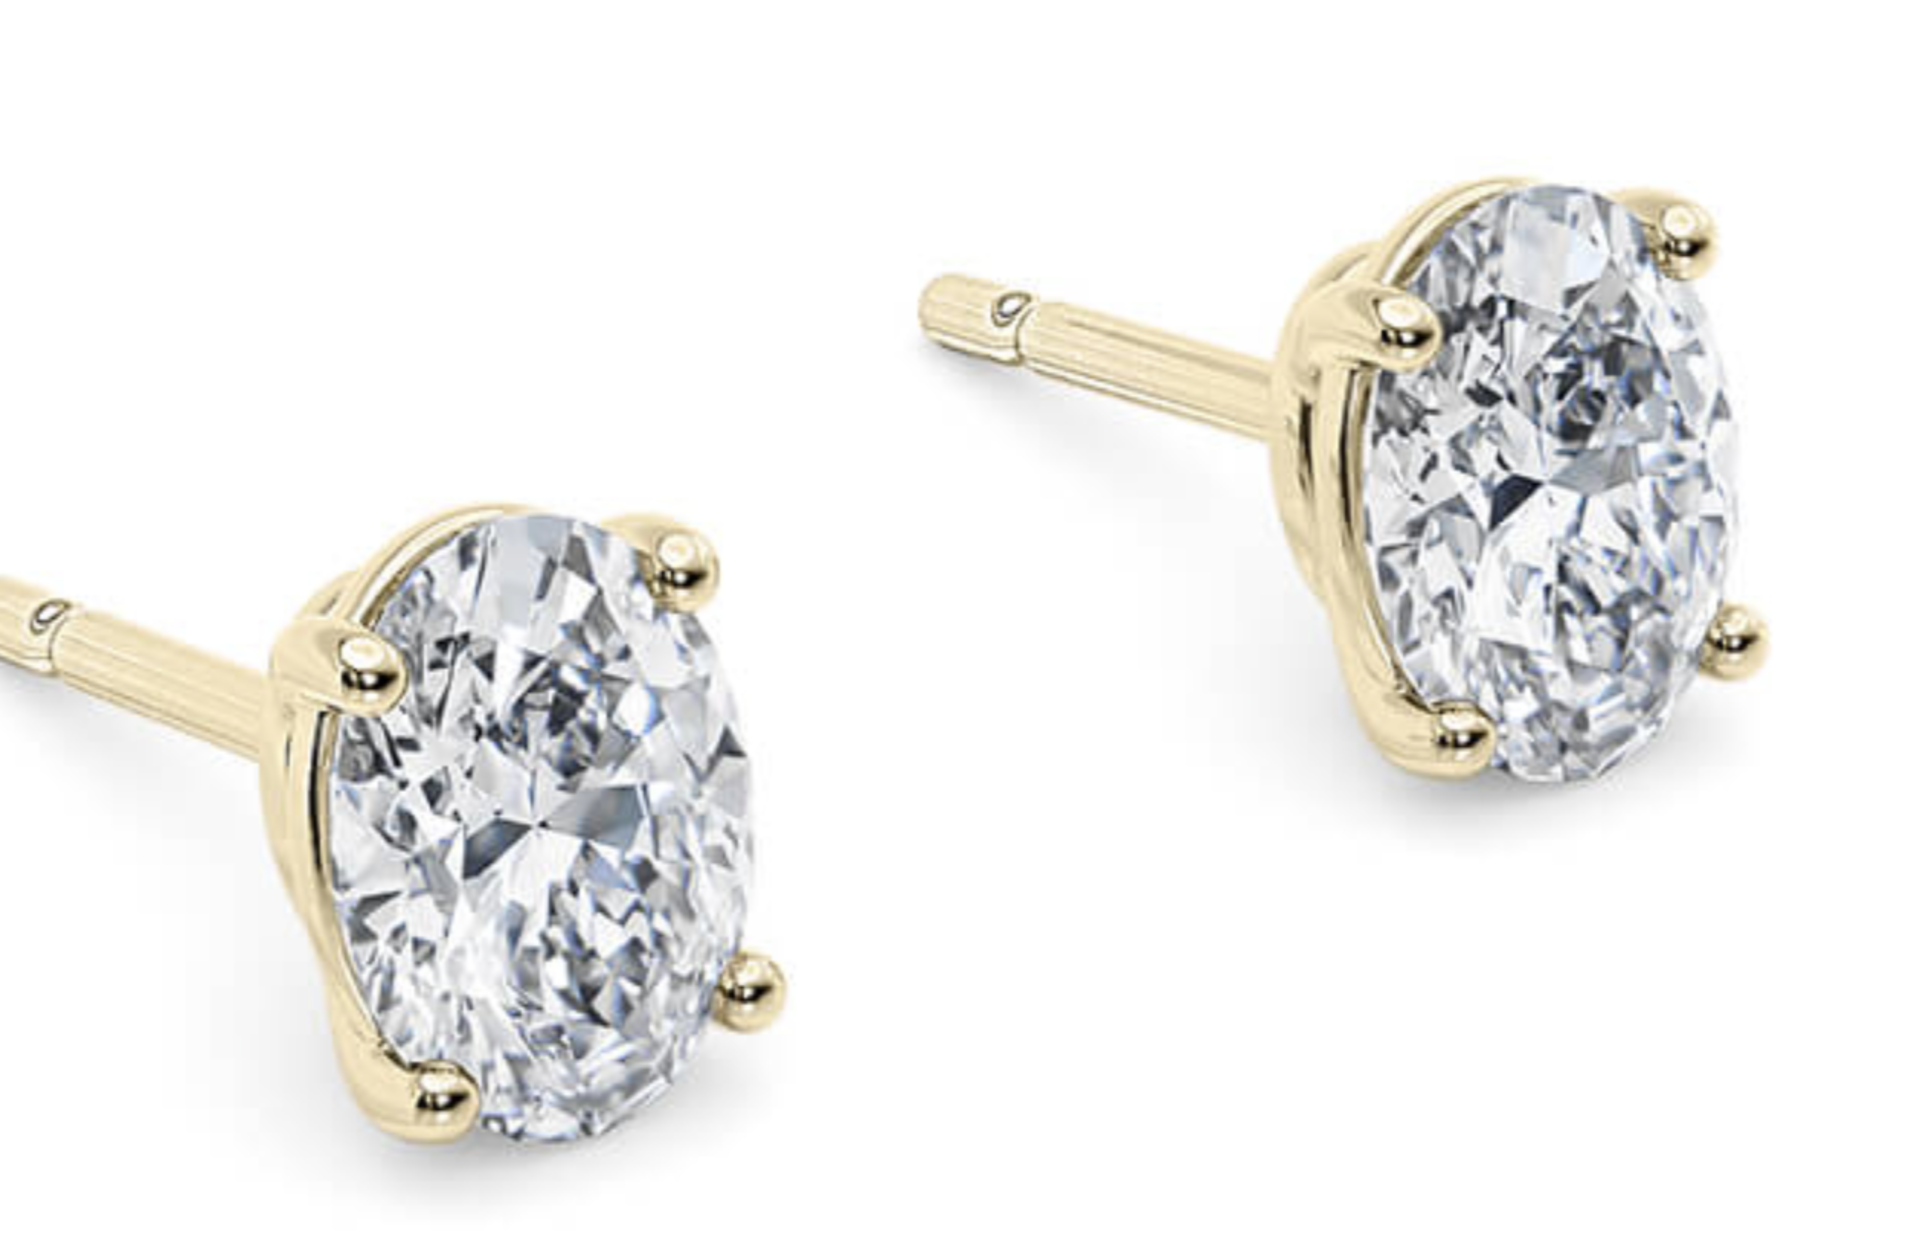 Oval Cut 2.00 Carat Natural Diamond Earrings Set in 18kt Yellow Gold - E Colour SI Clarity - GIA - Image 2 of 3